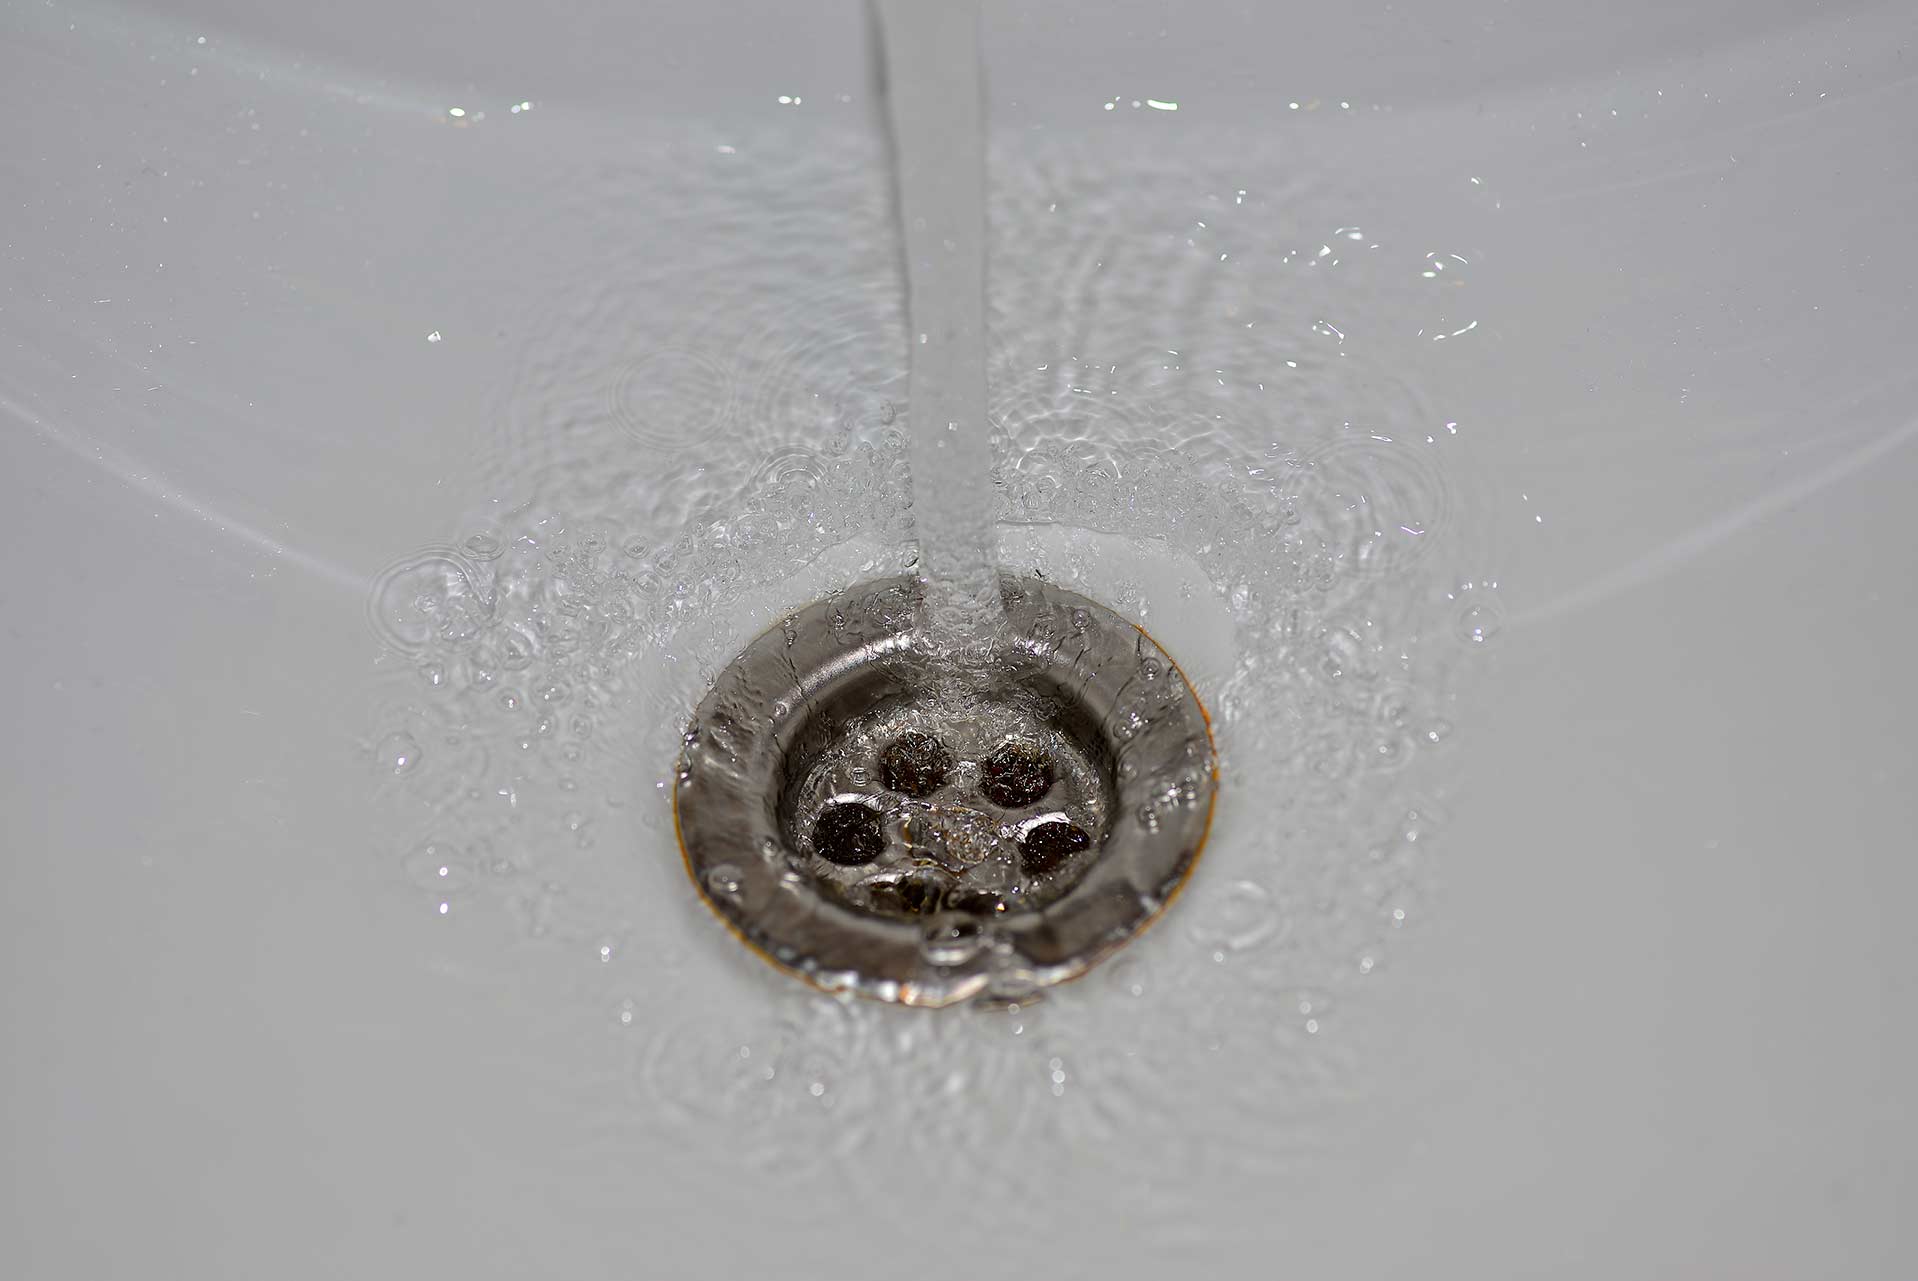 A2B Drains provides services to unblock blocked sinks and drains for properties in Gillingham Dorset.